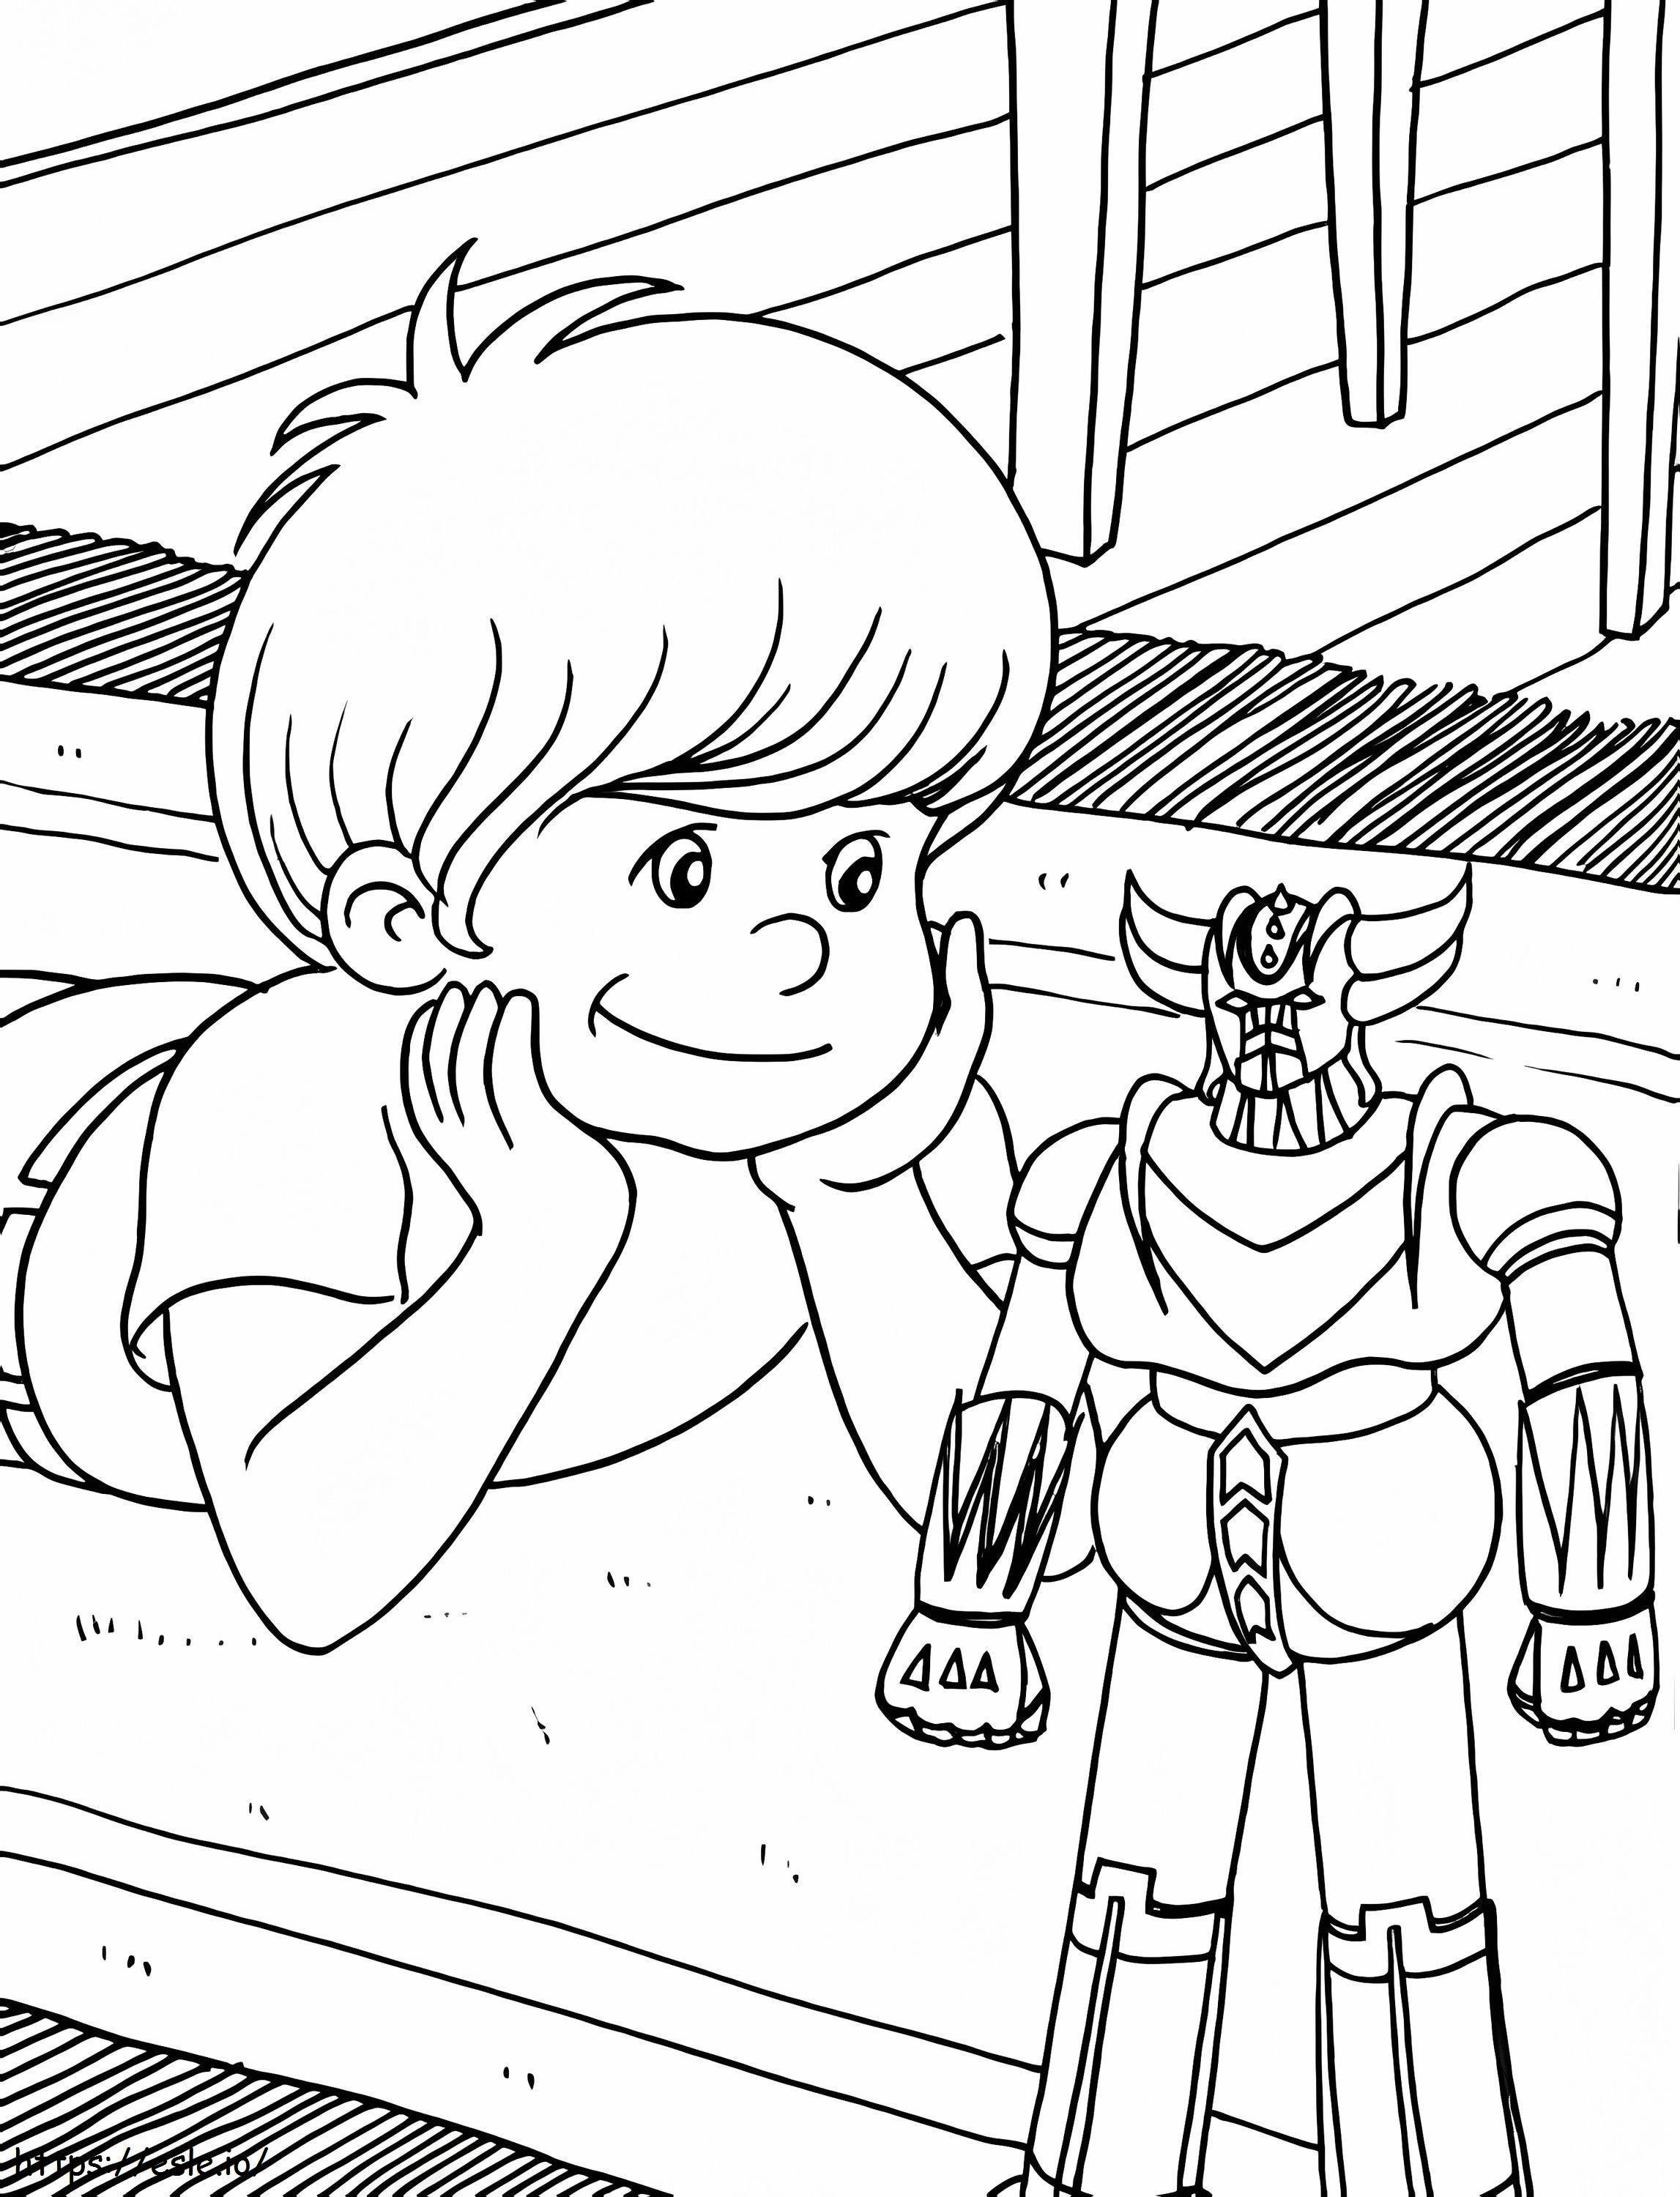 Goldorak Toy And Child coloring page